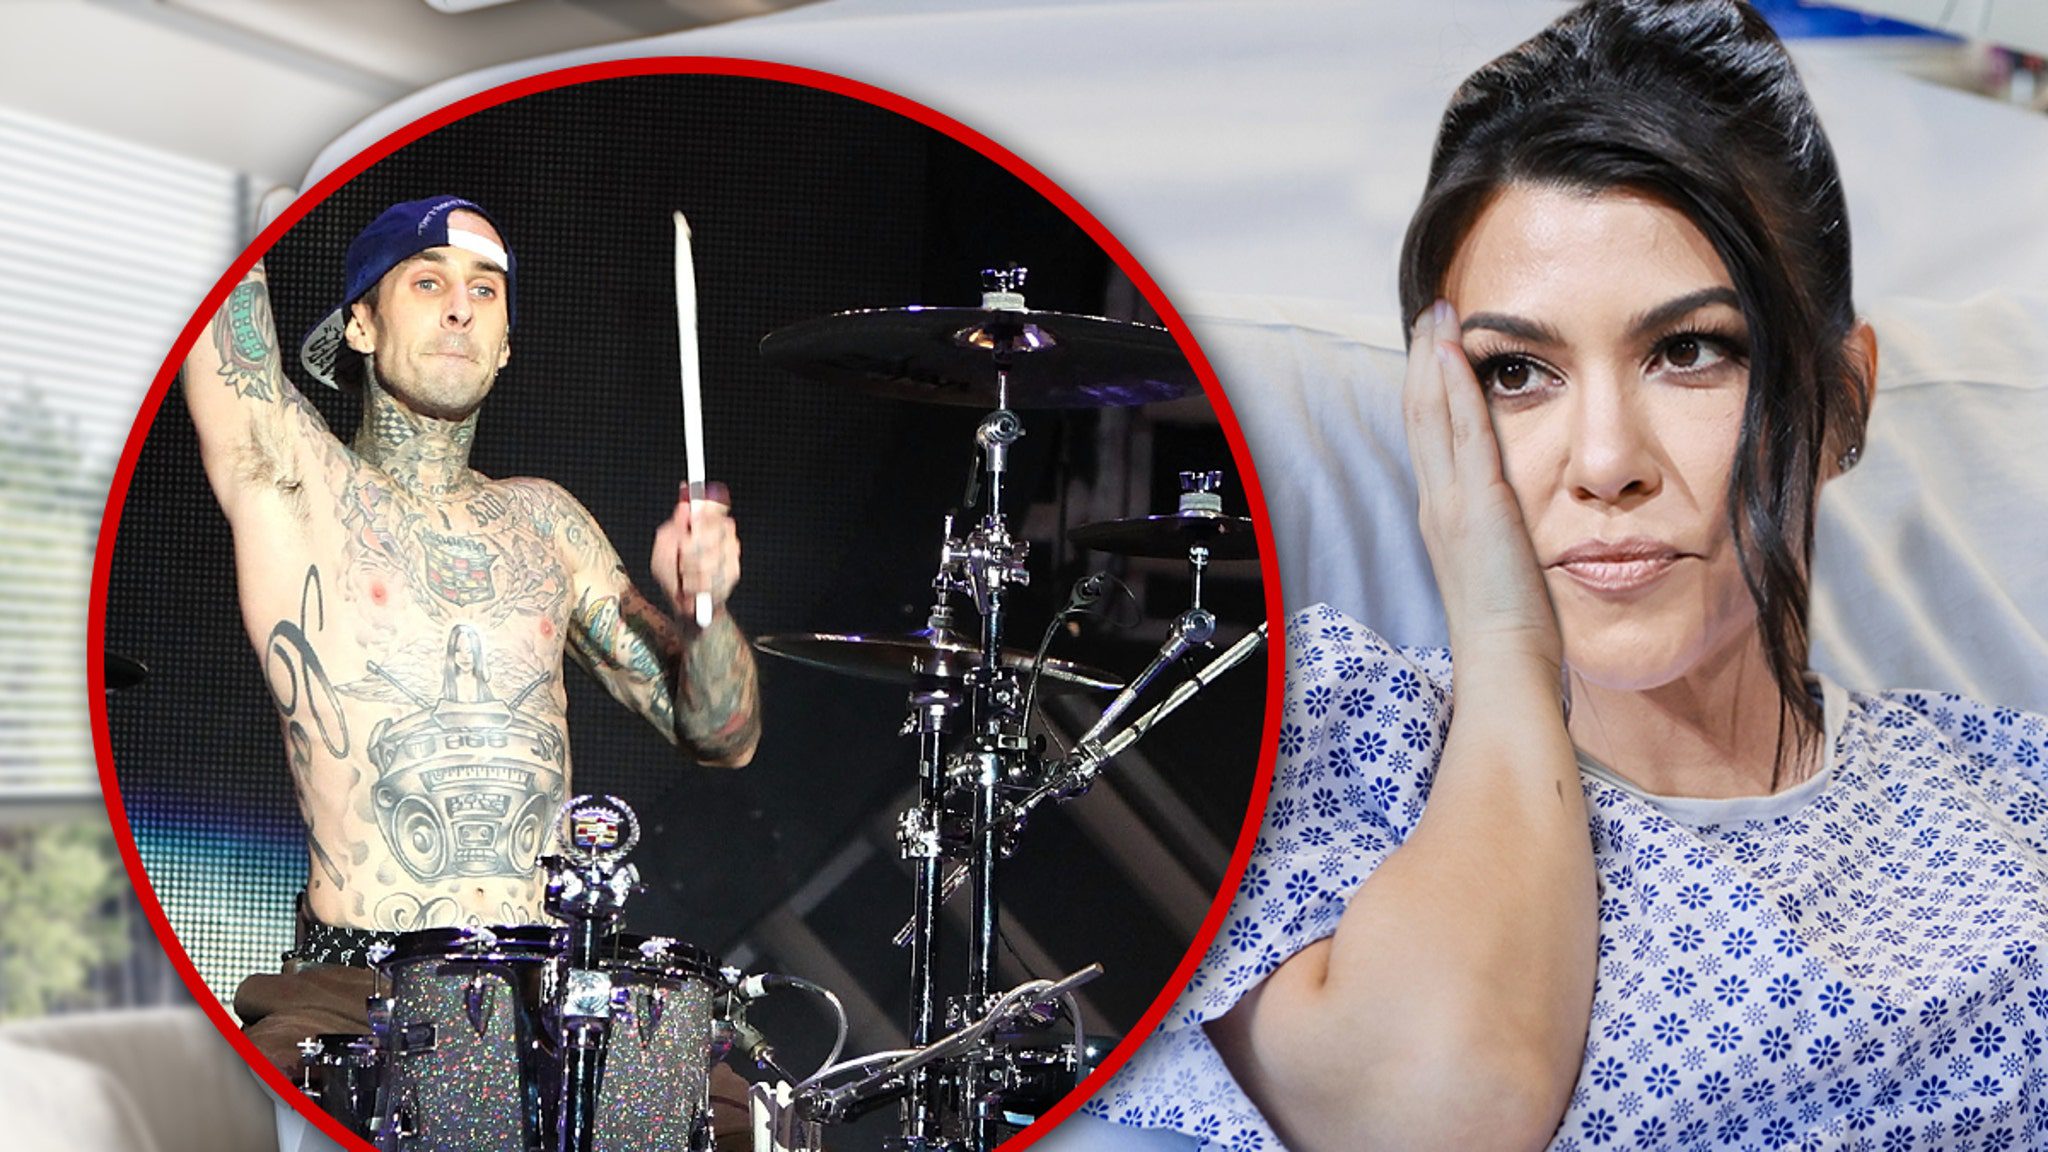 Blink-182's Travis Barker Rocks Delivery Room with Newborn's Heartbeat Drama!